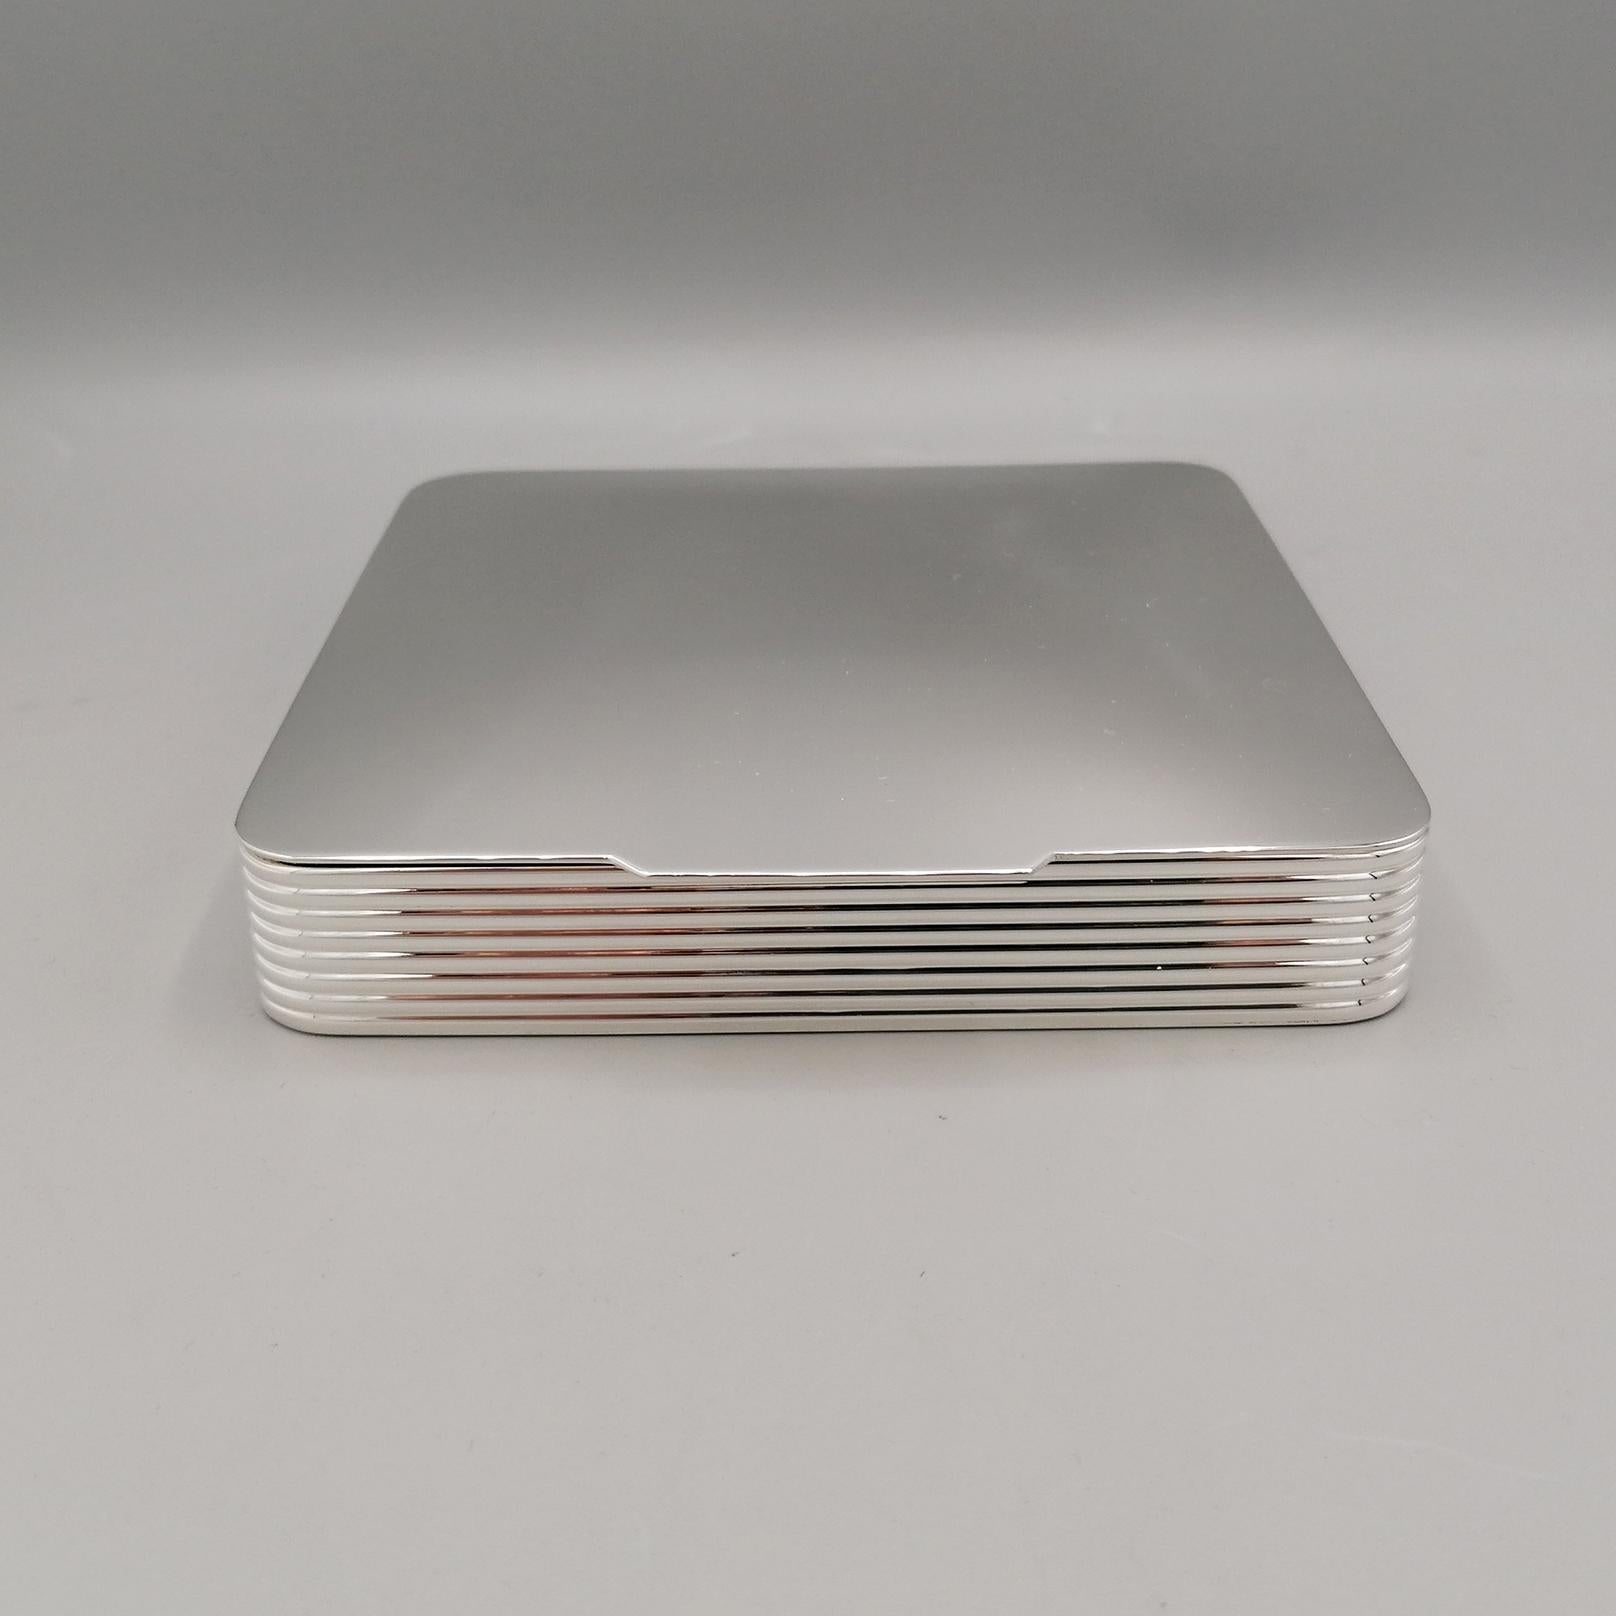 XXI Century Italian Sterling Silver Modern Table Box
Modern style 925 sterling silver table box.
The box is square in shape and the edge of the body is lined.
The lid is hinged and has been left completely smooth as has the inside of the box